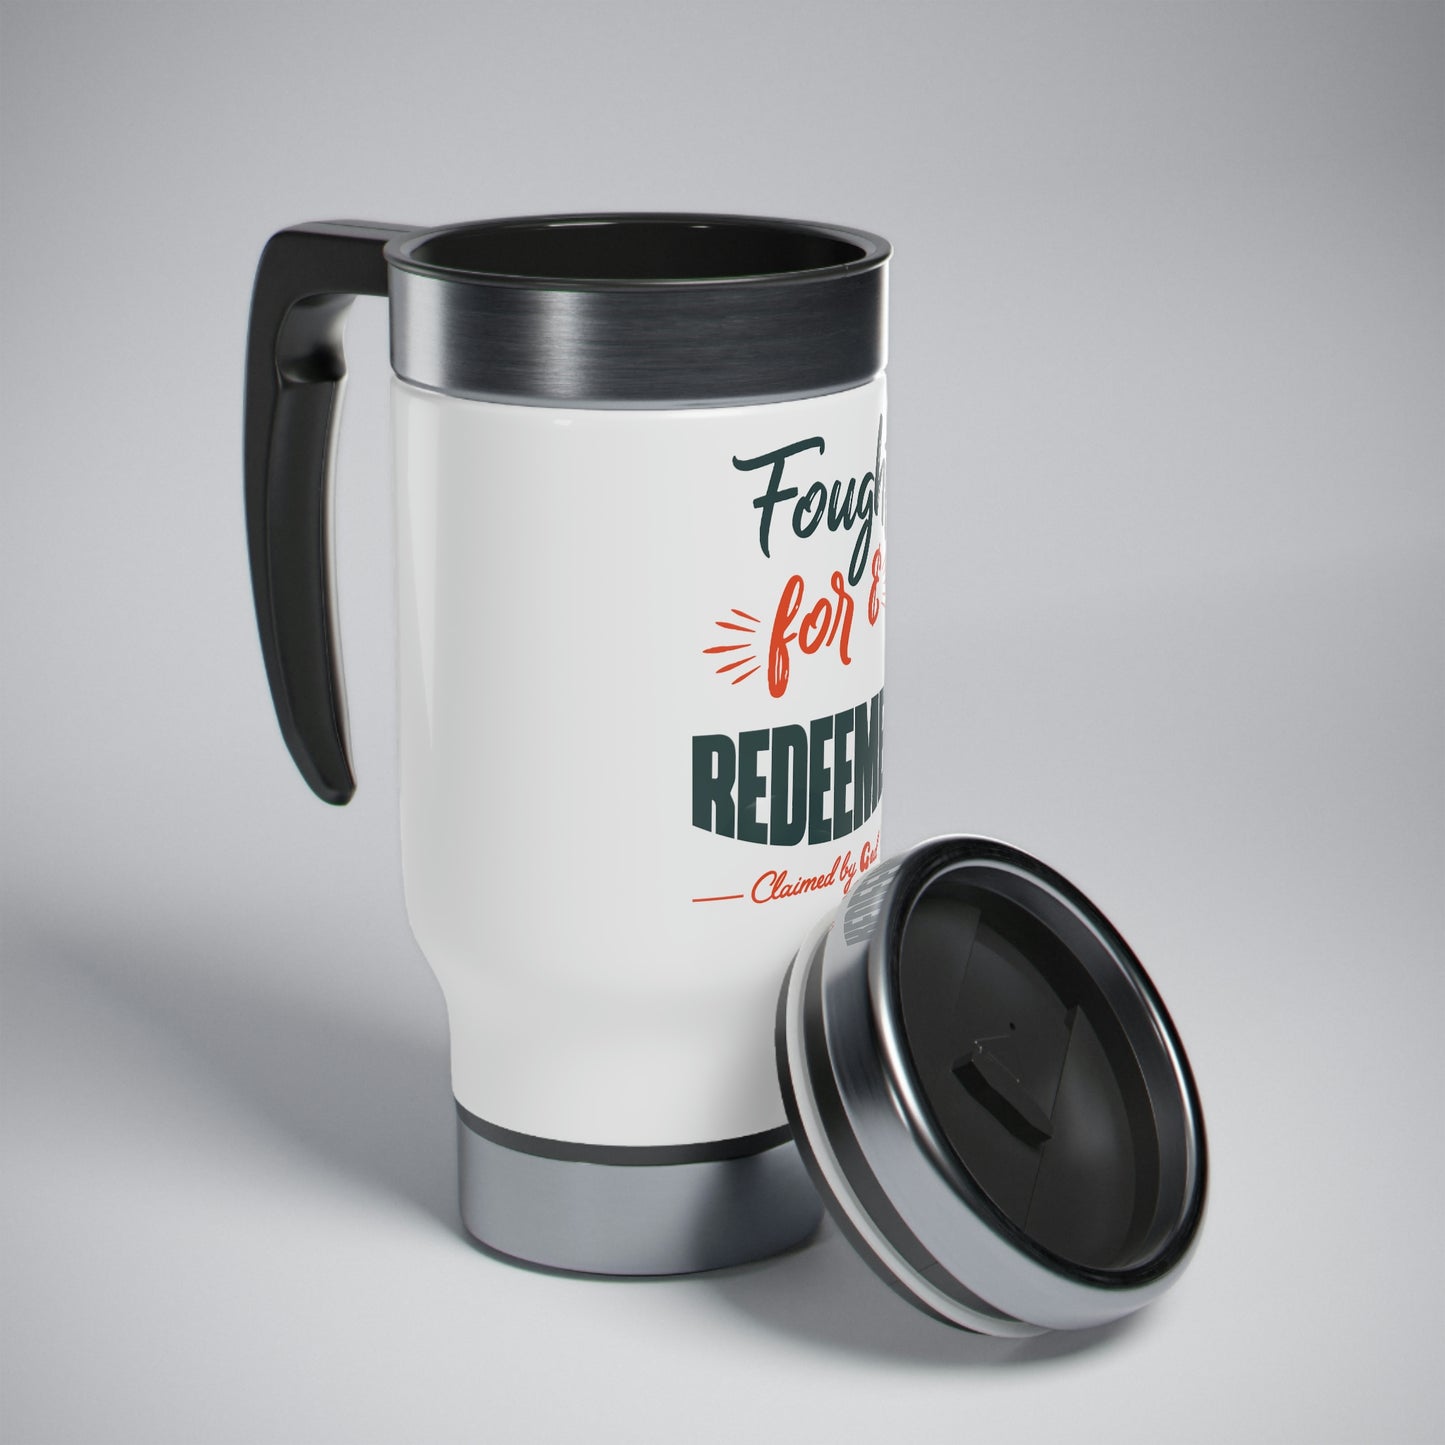 Fought For and Redeemed Travel Mug with Handle, 14oz